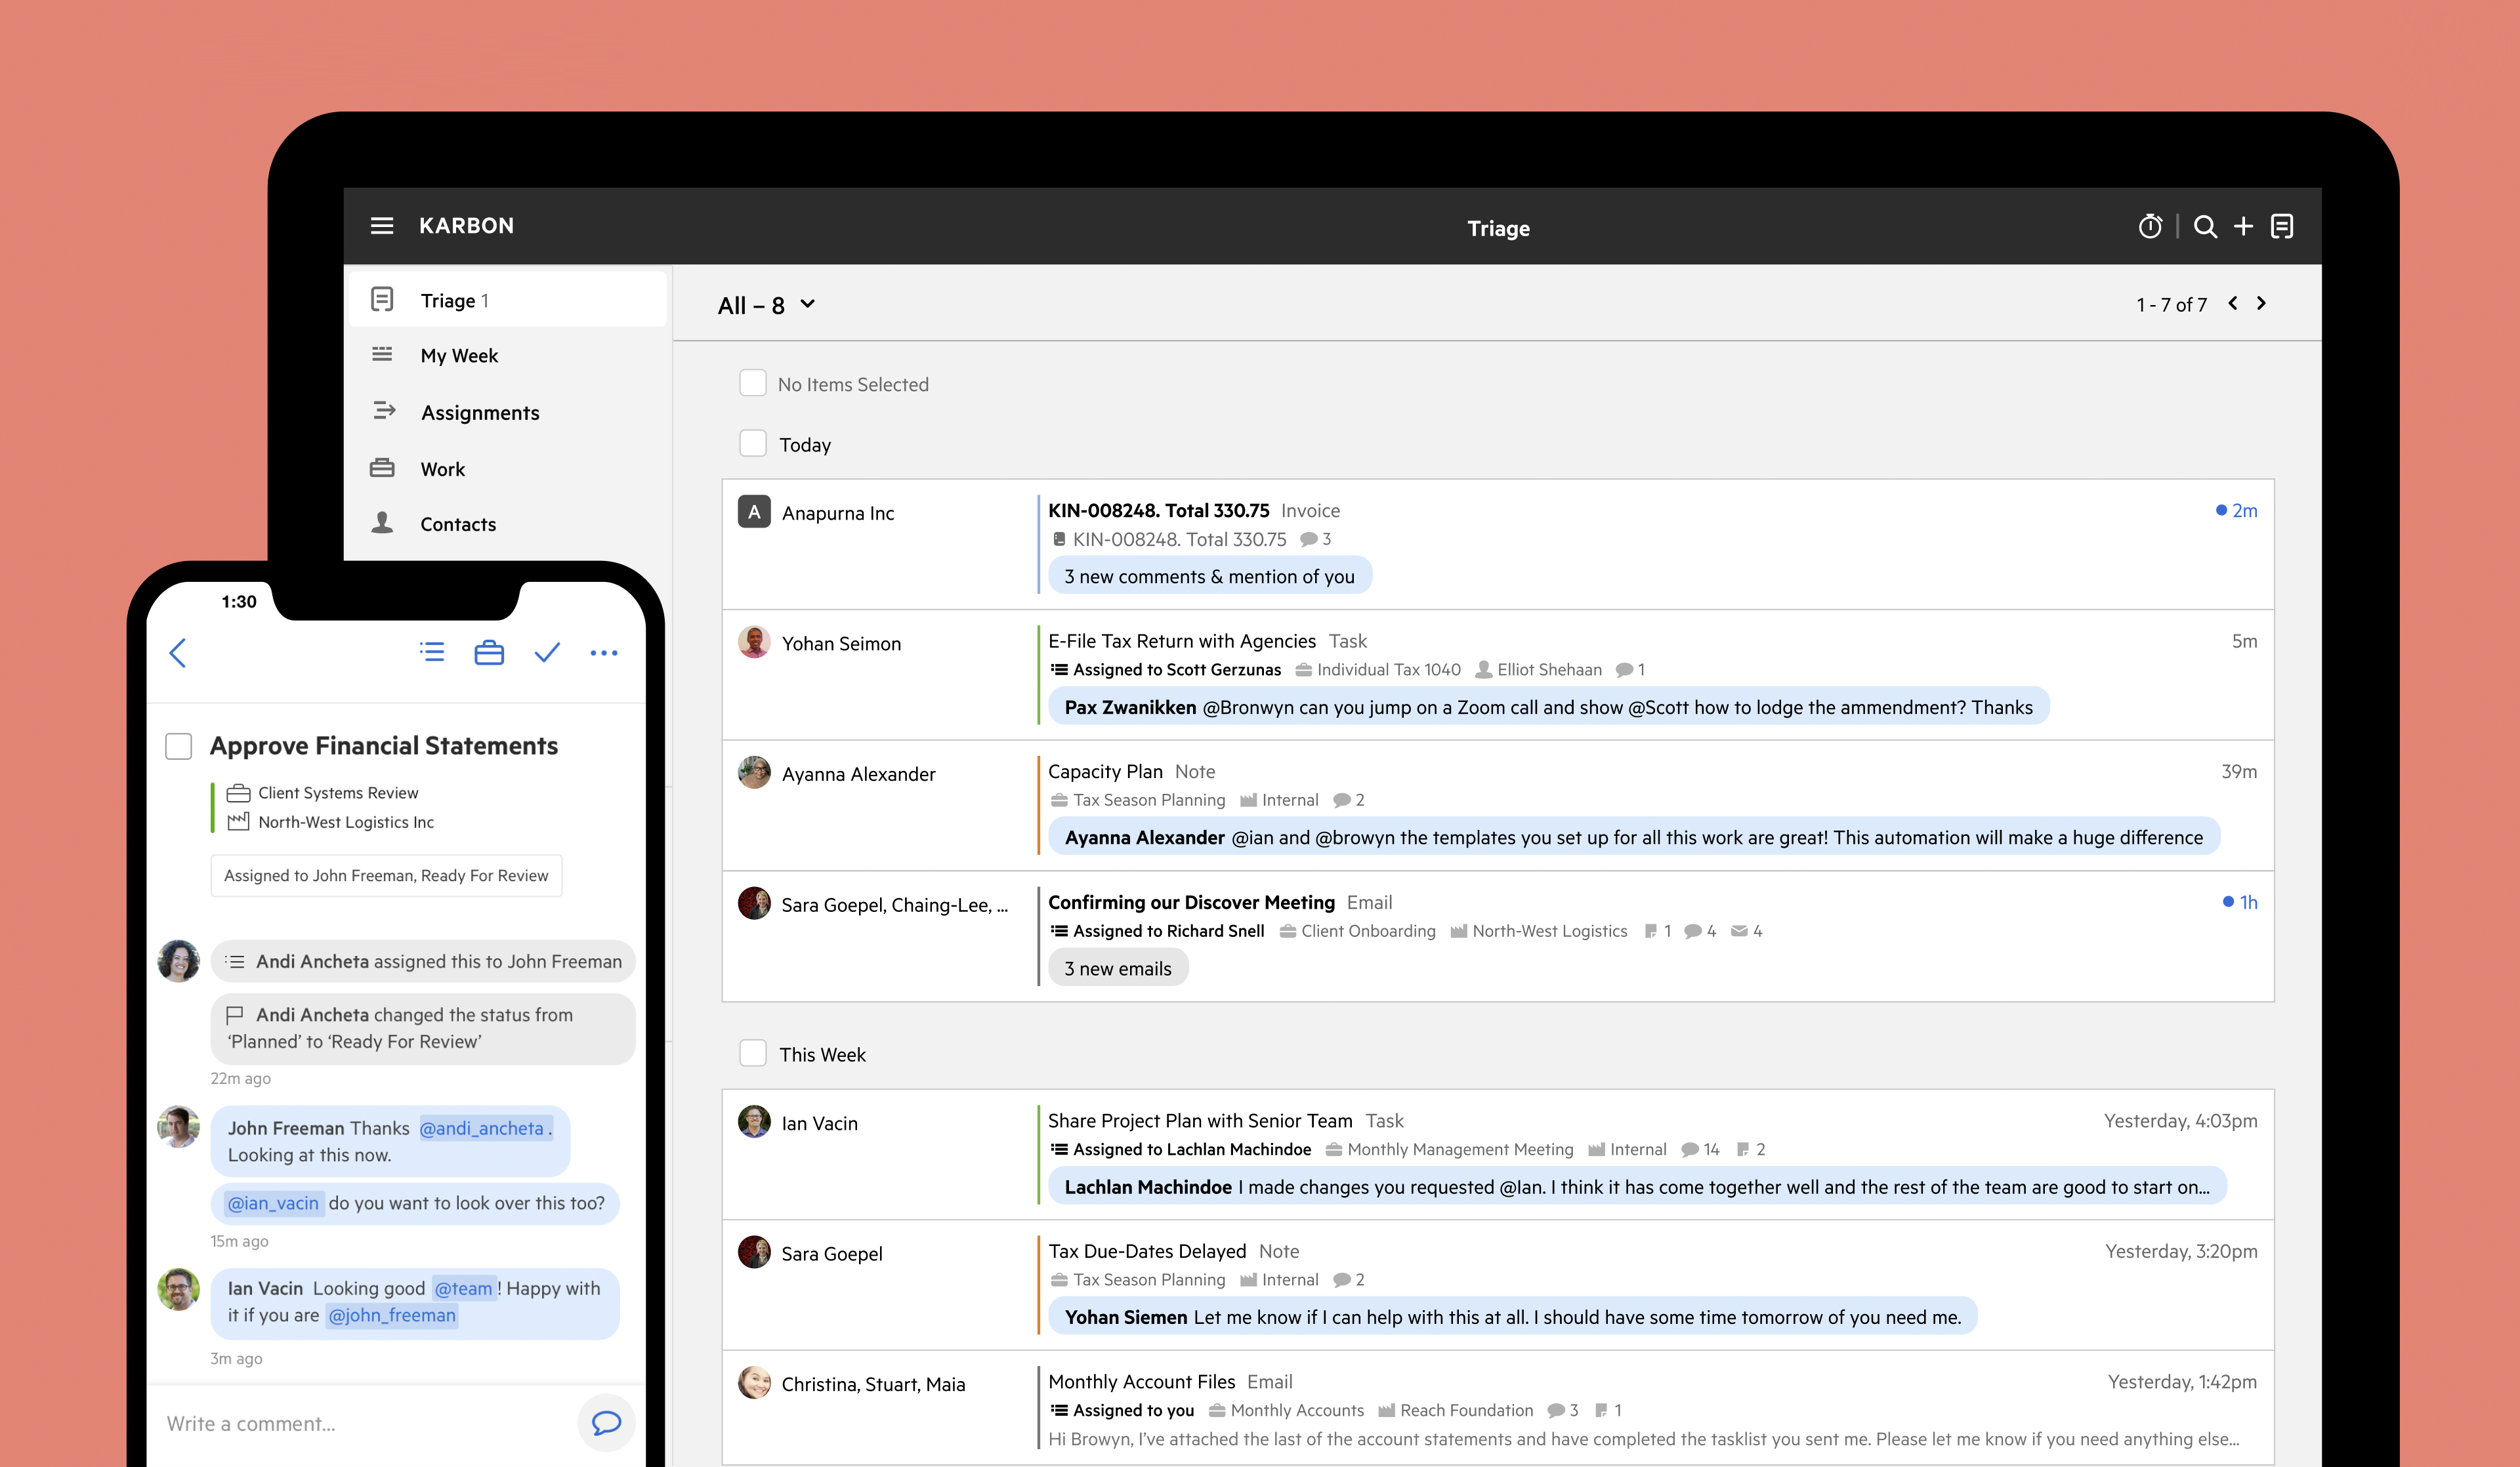 Karbon is an accounting practice management tool with deep email integration